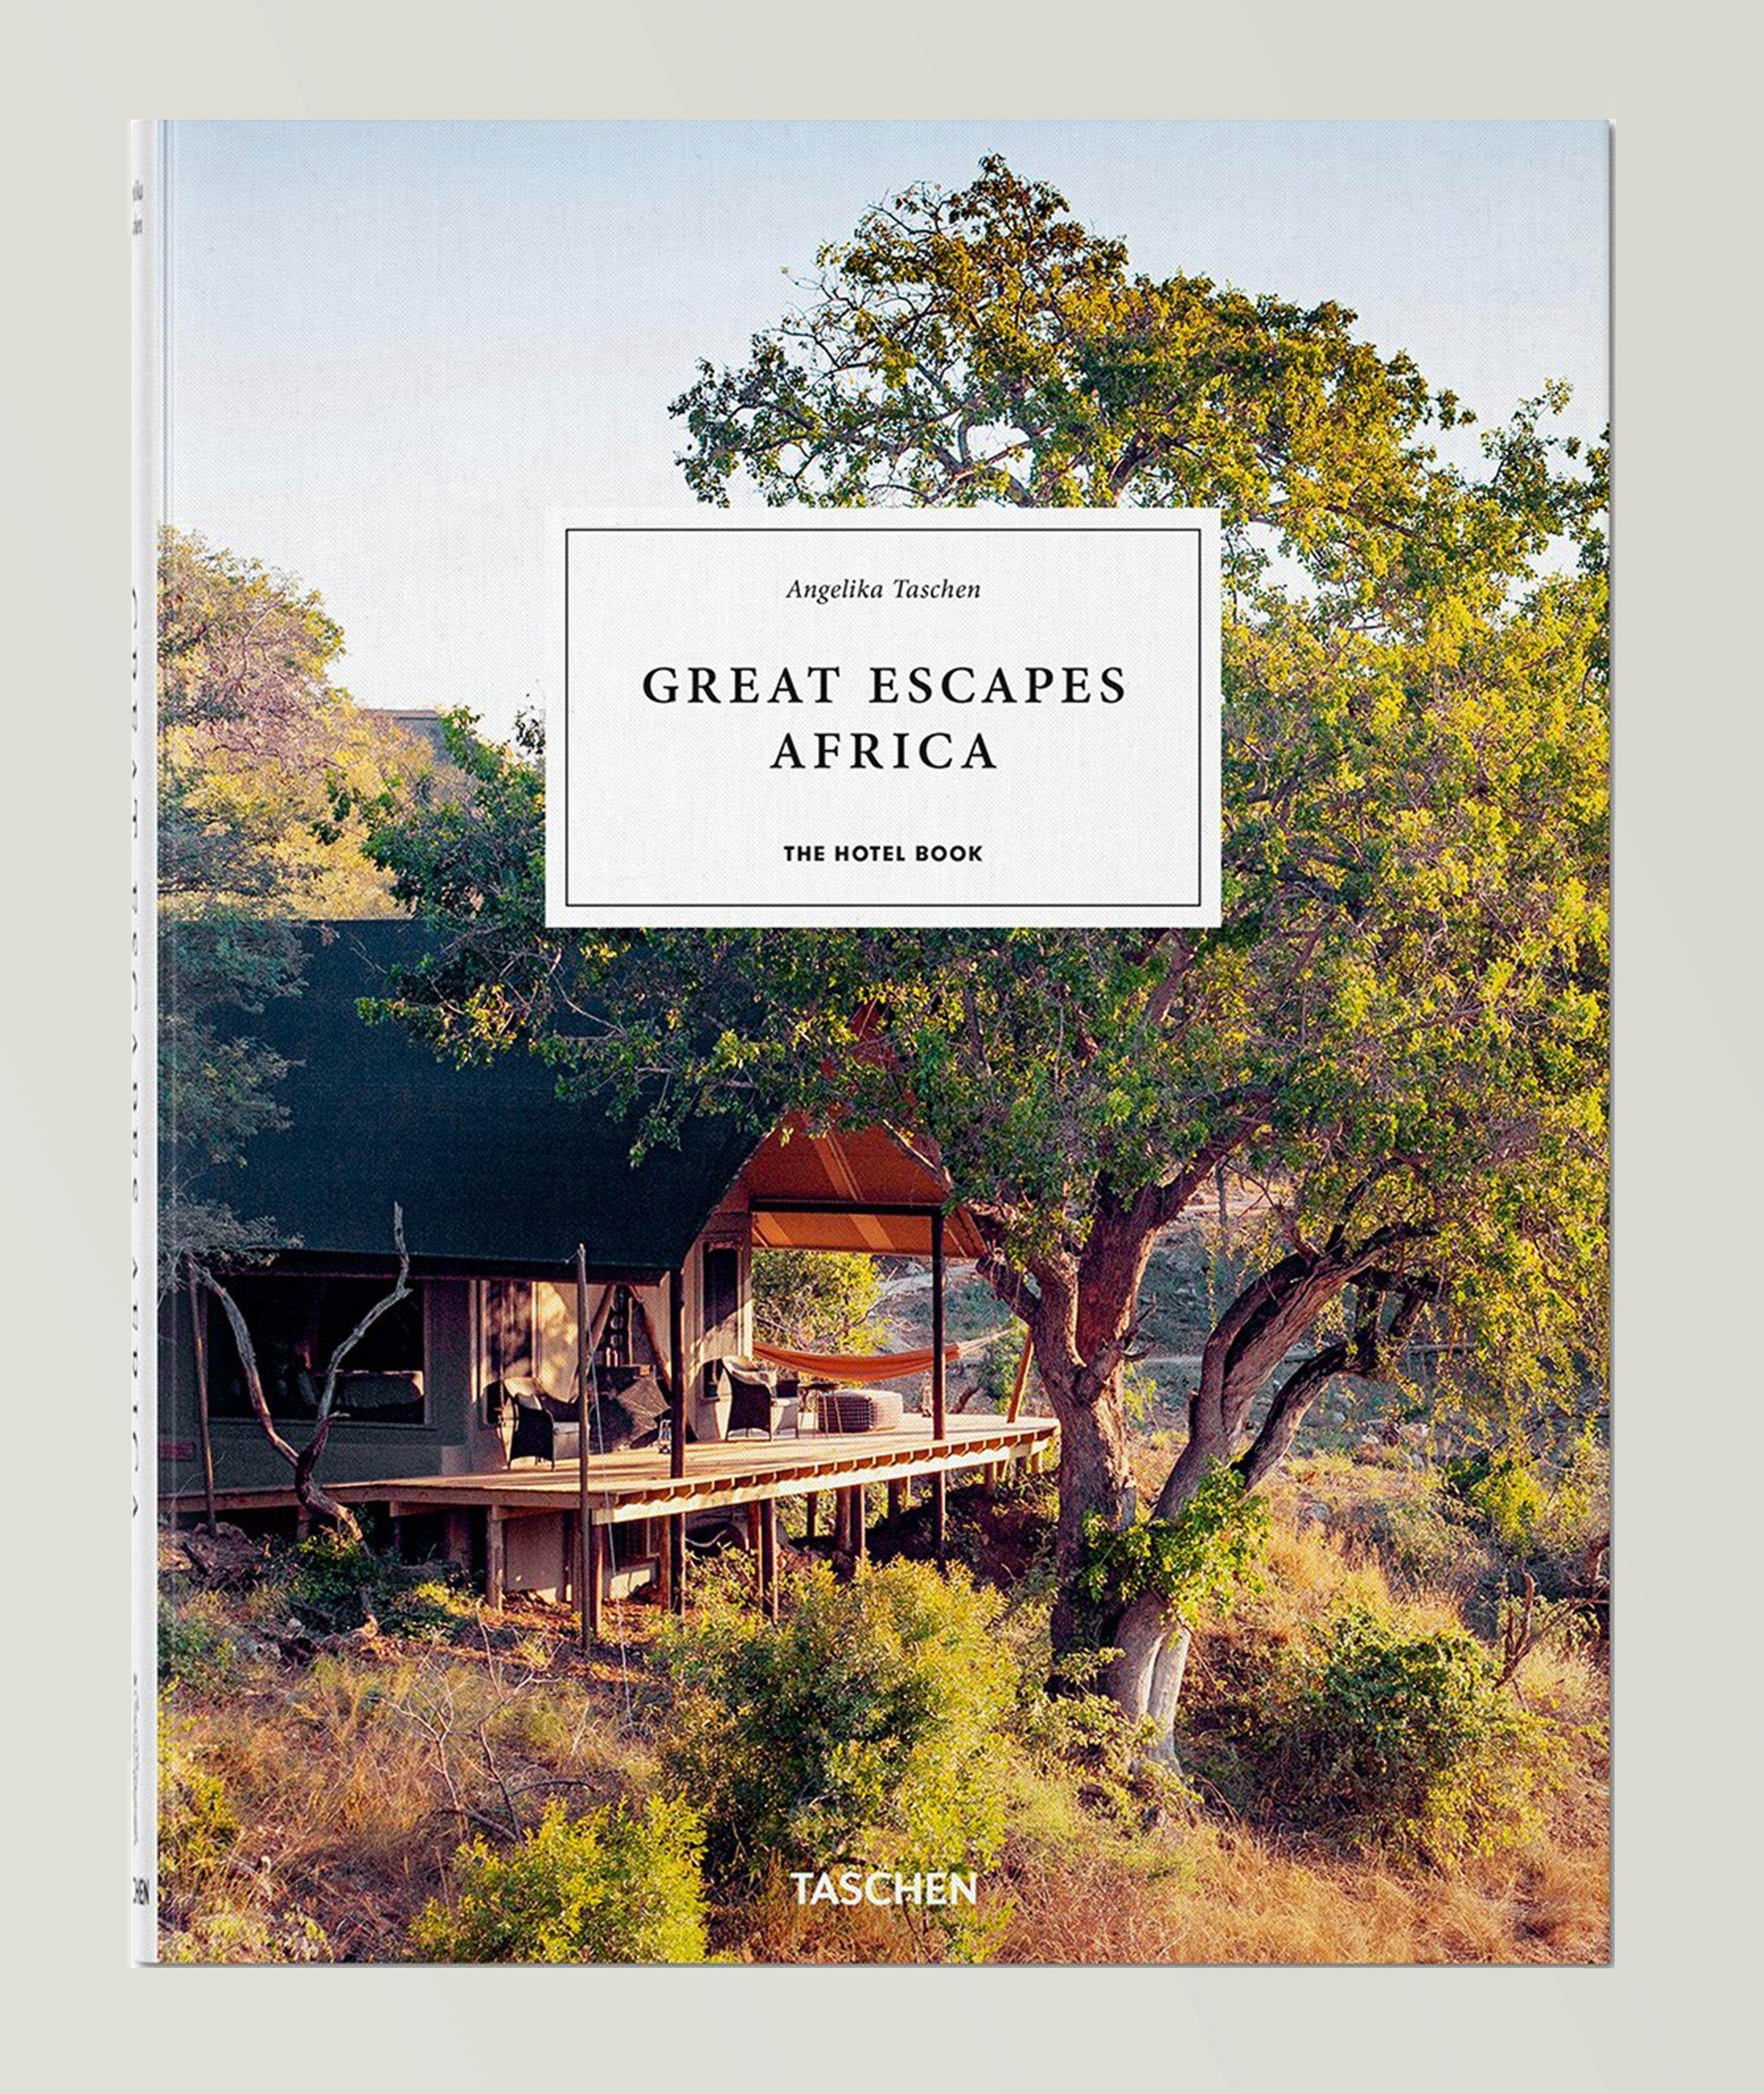 Great Escapes Africa. The Hotel Book image 0